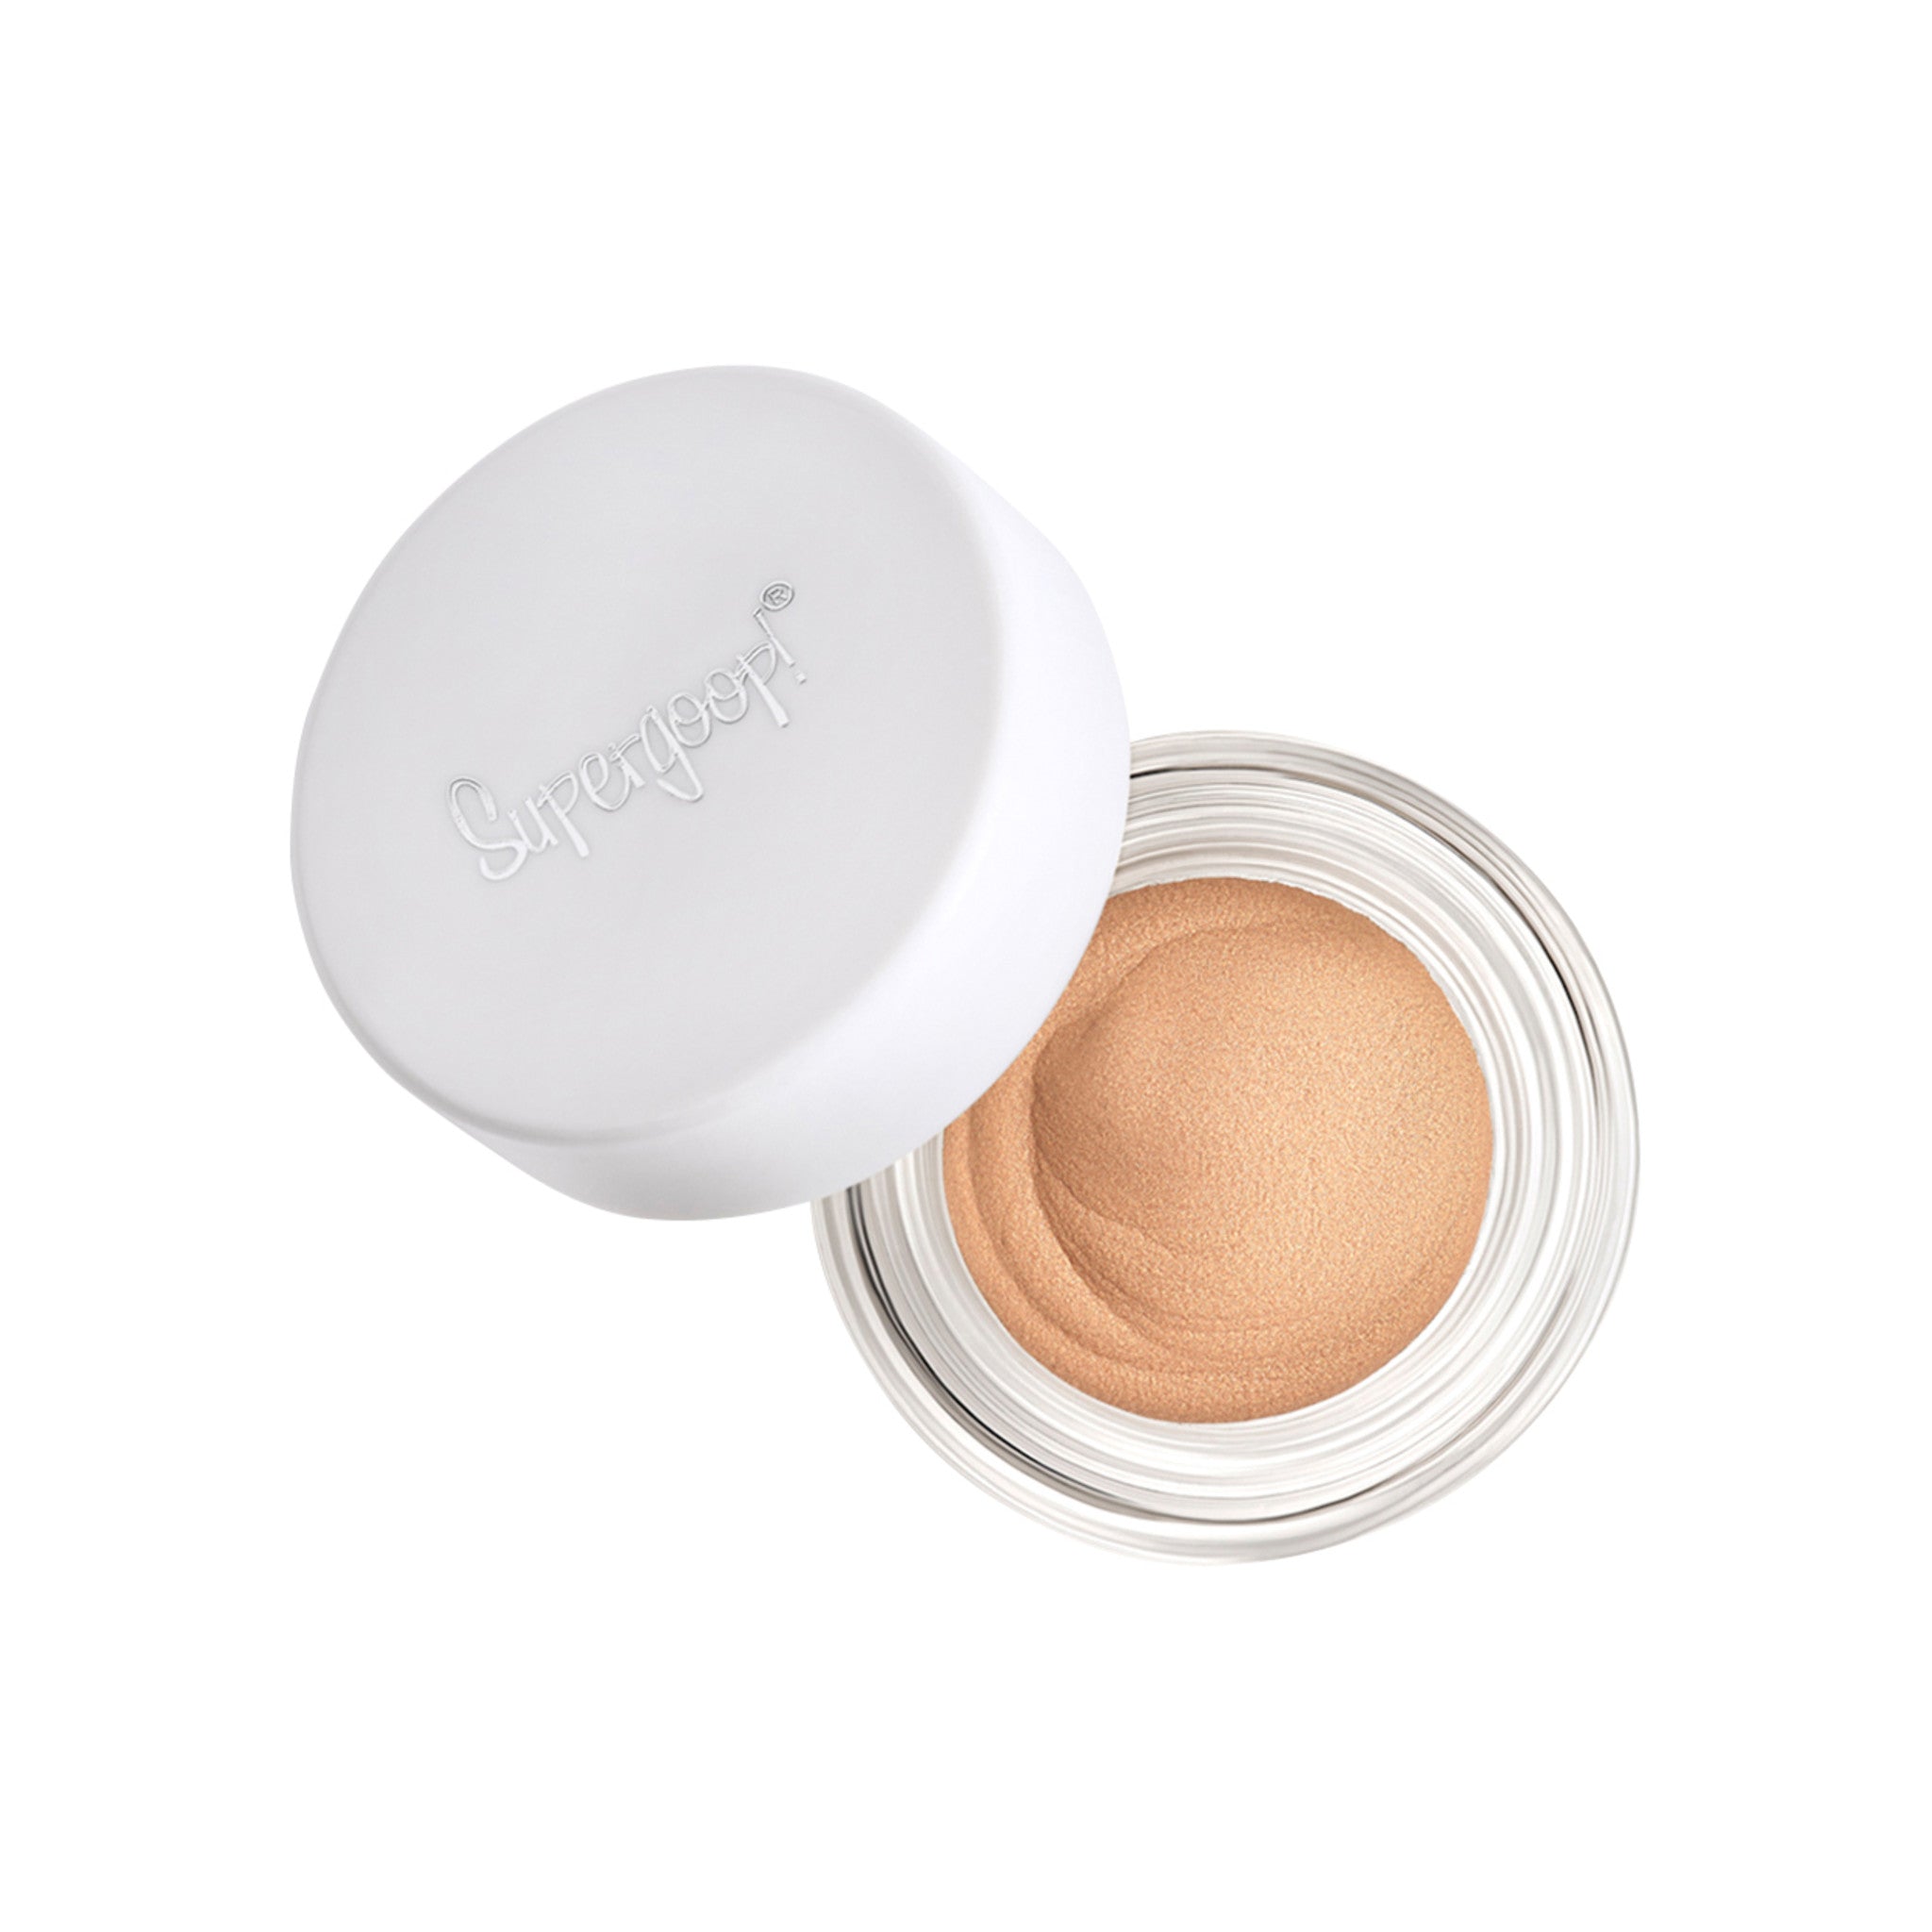 Supergoop! Shimmer Shade SPF 30 Color/Shade variant: Golden Hour main image. This product is in the color nude